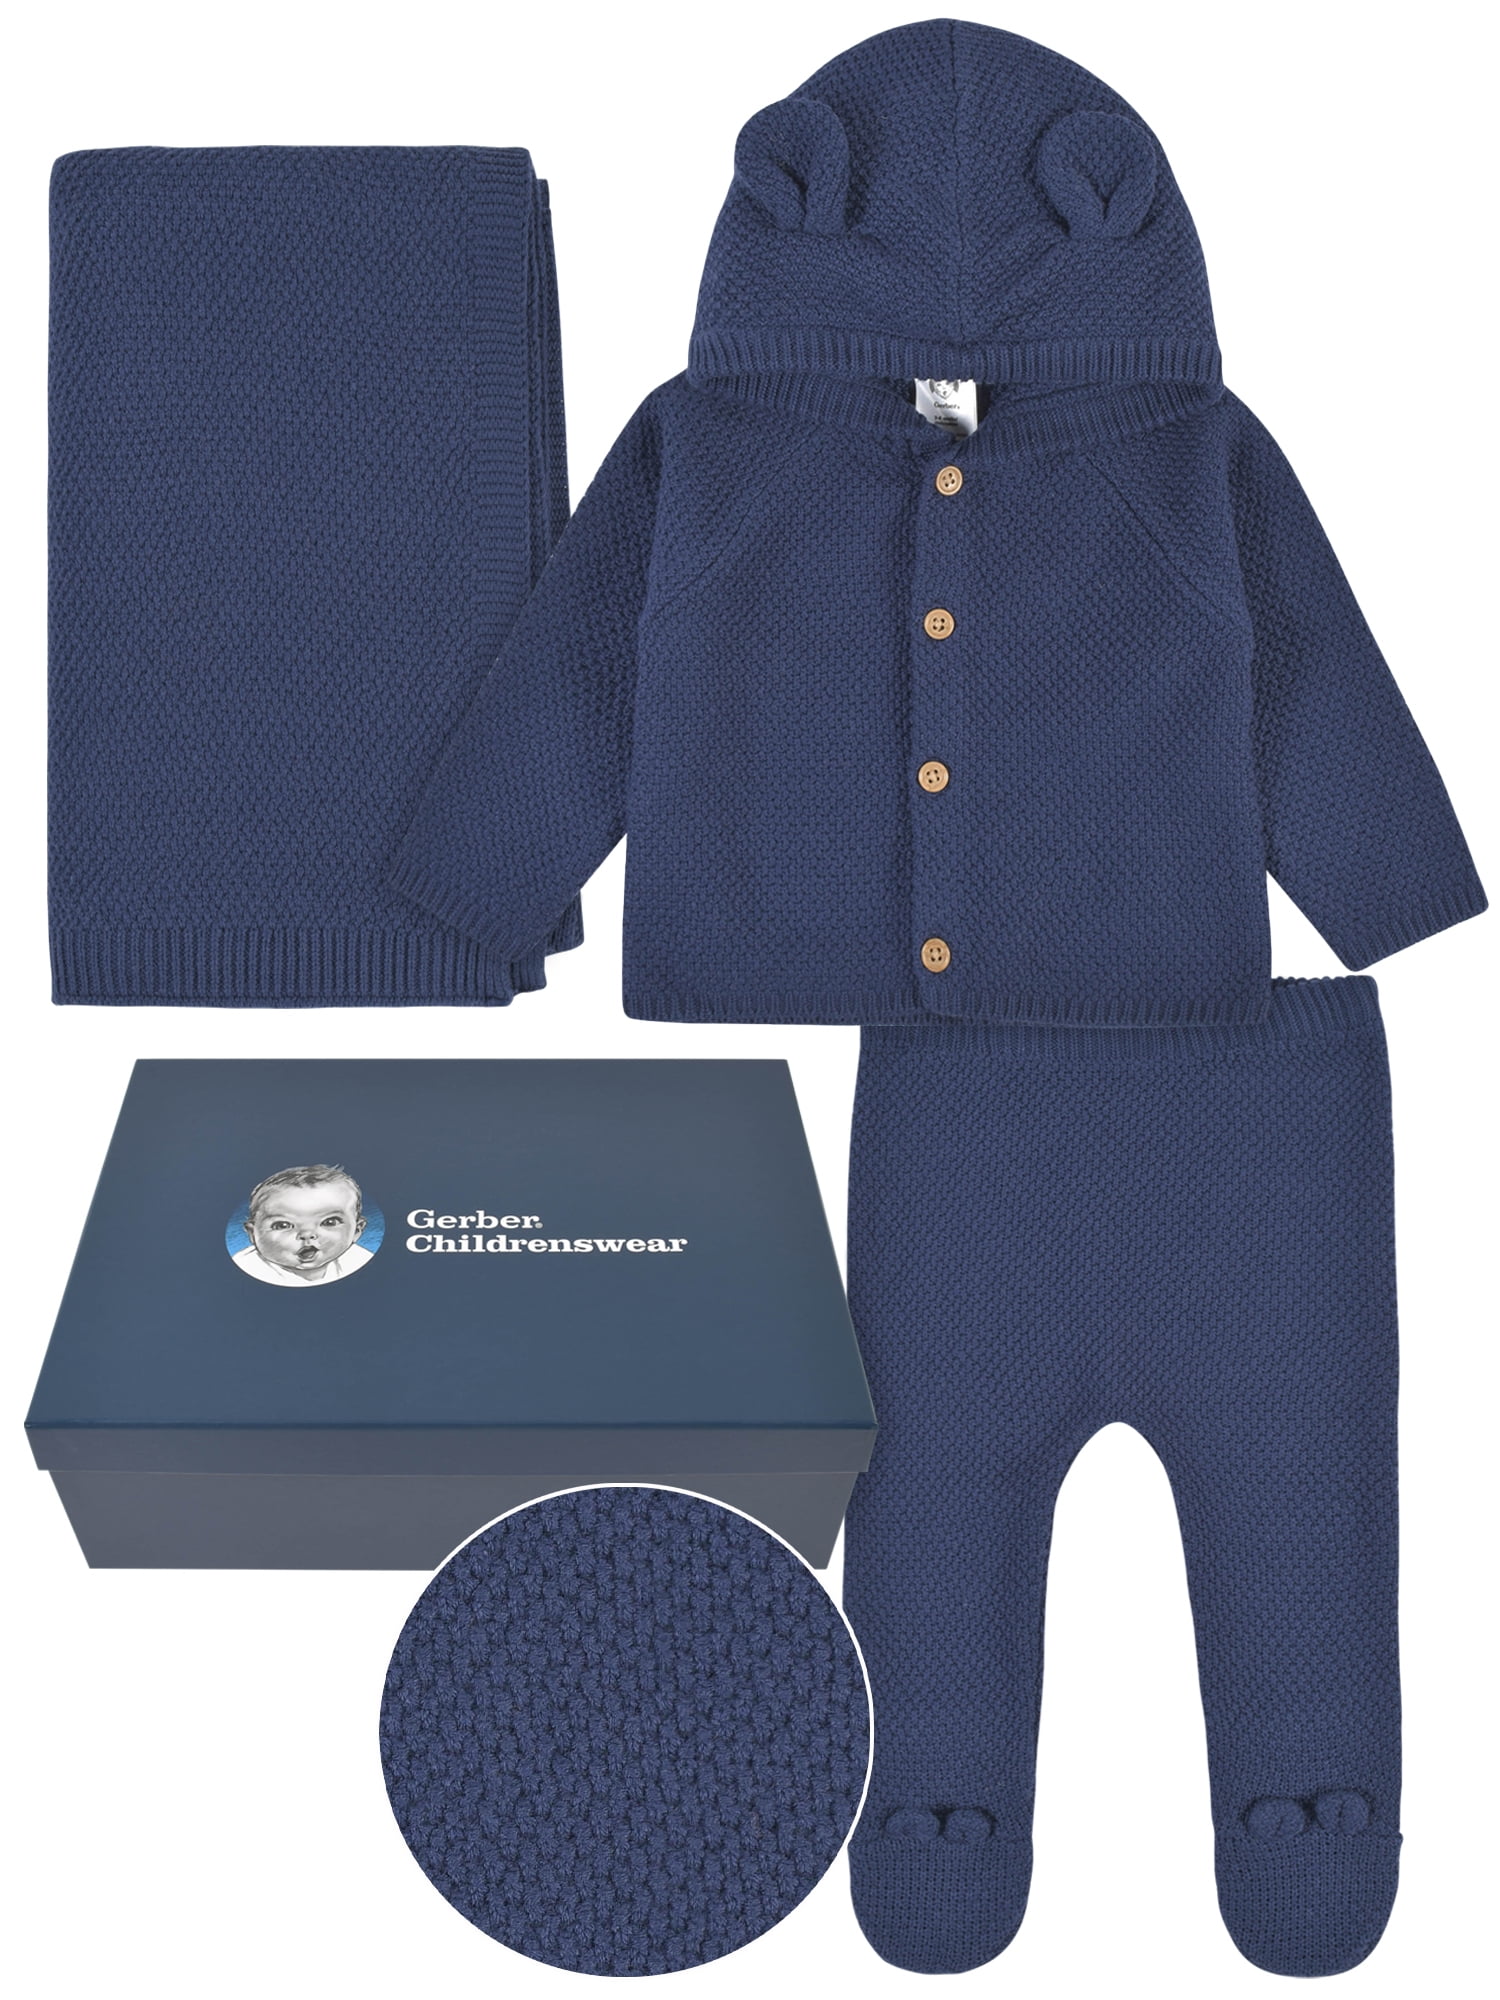 3-Piece Gerber Baby Set w/ Hooded Sweater, Pants & Blanket + Gift Box $15.88 & More + Free S&H w/ Walmart+ or $35+